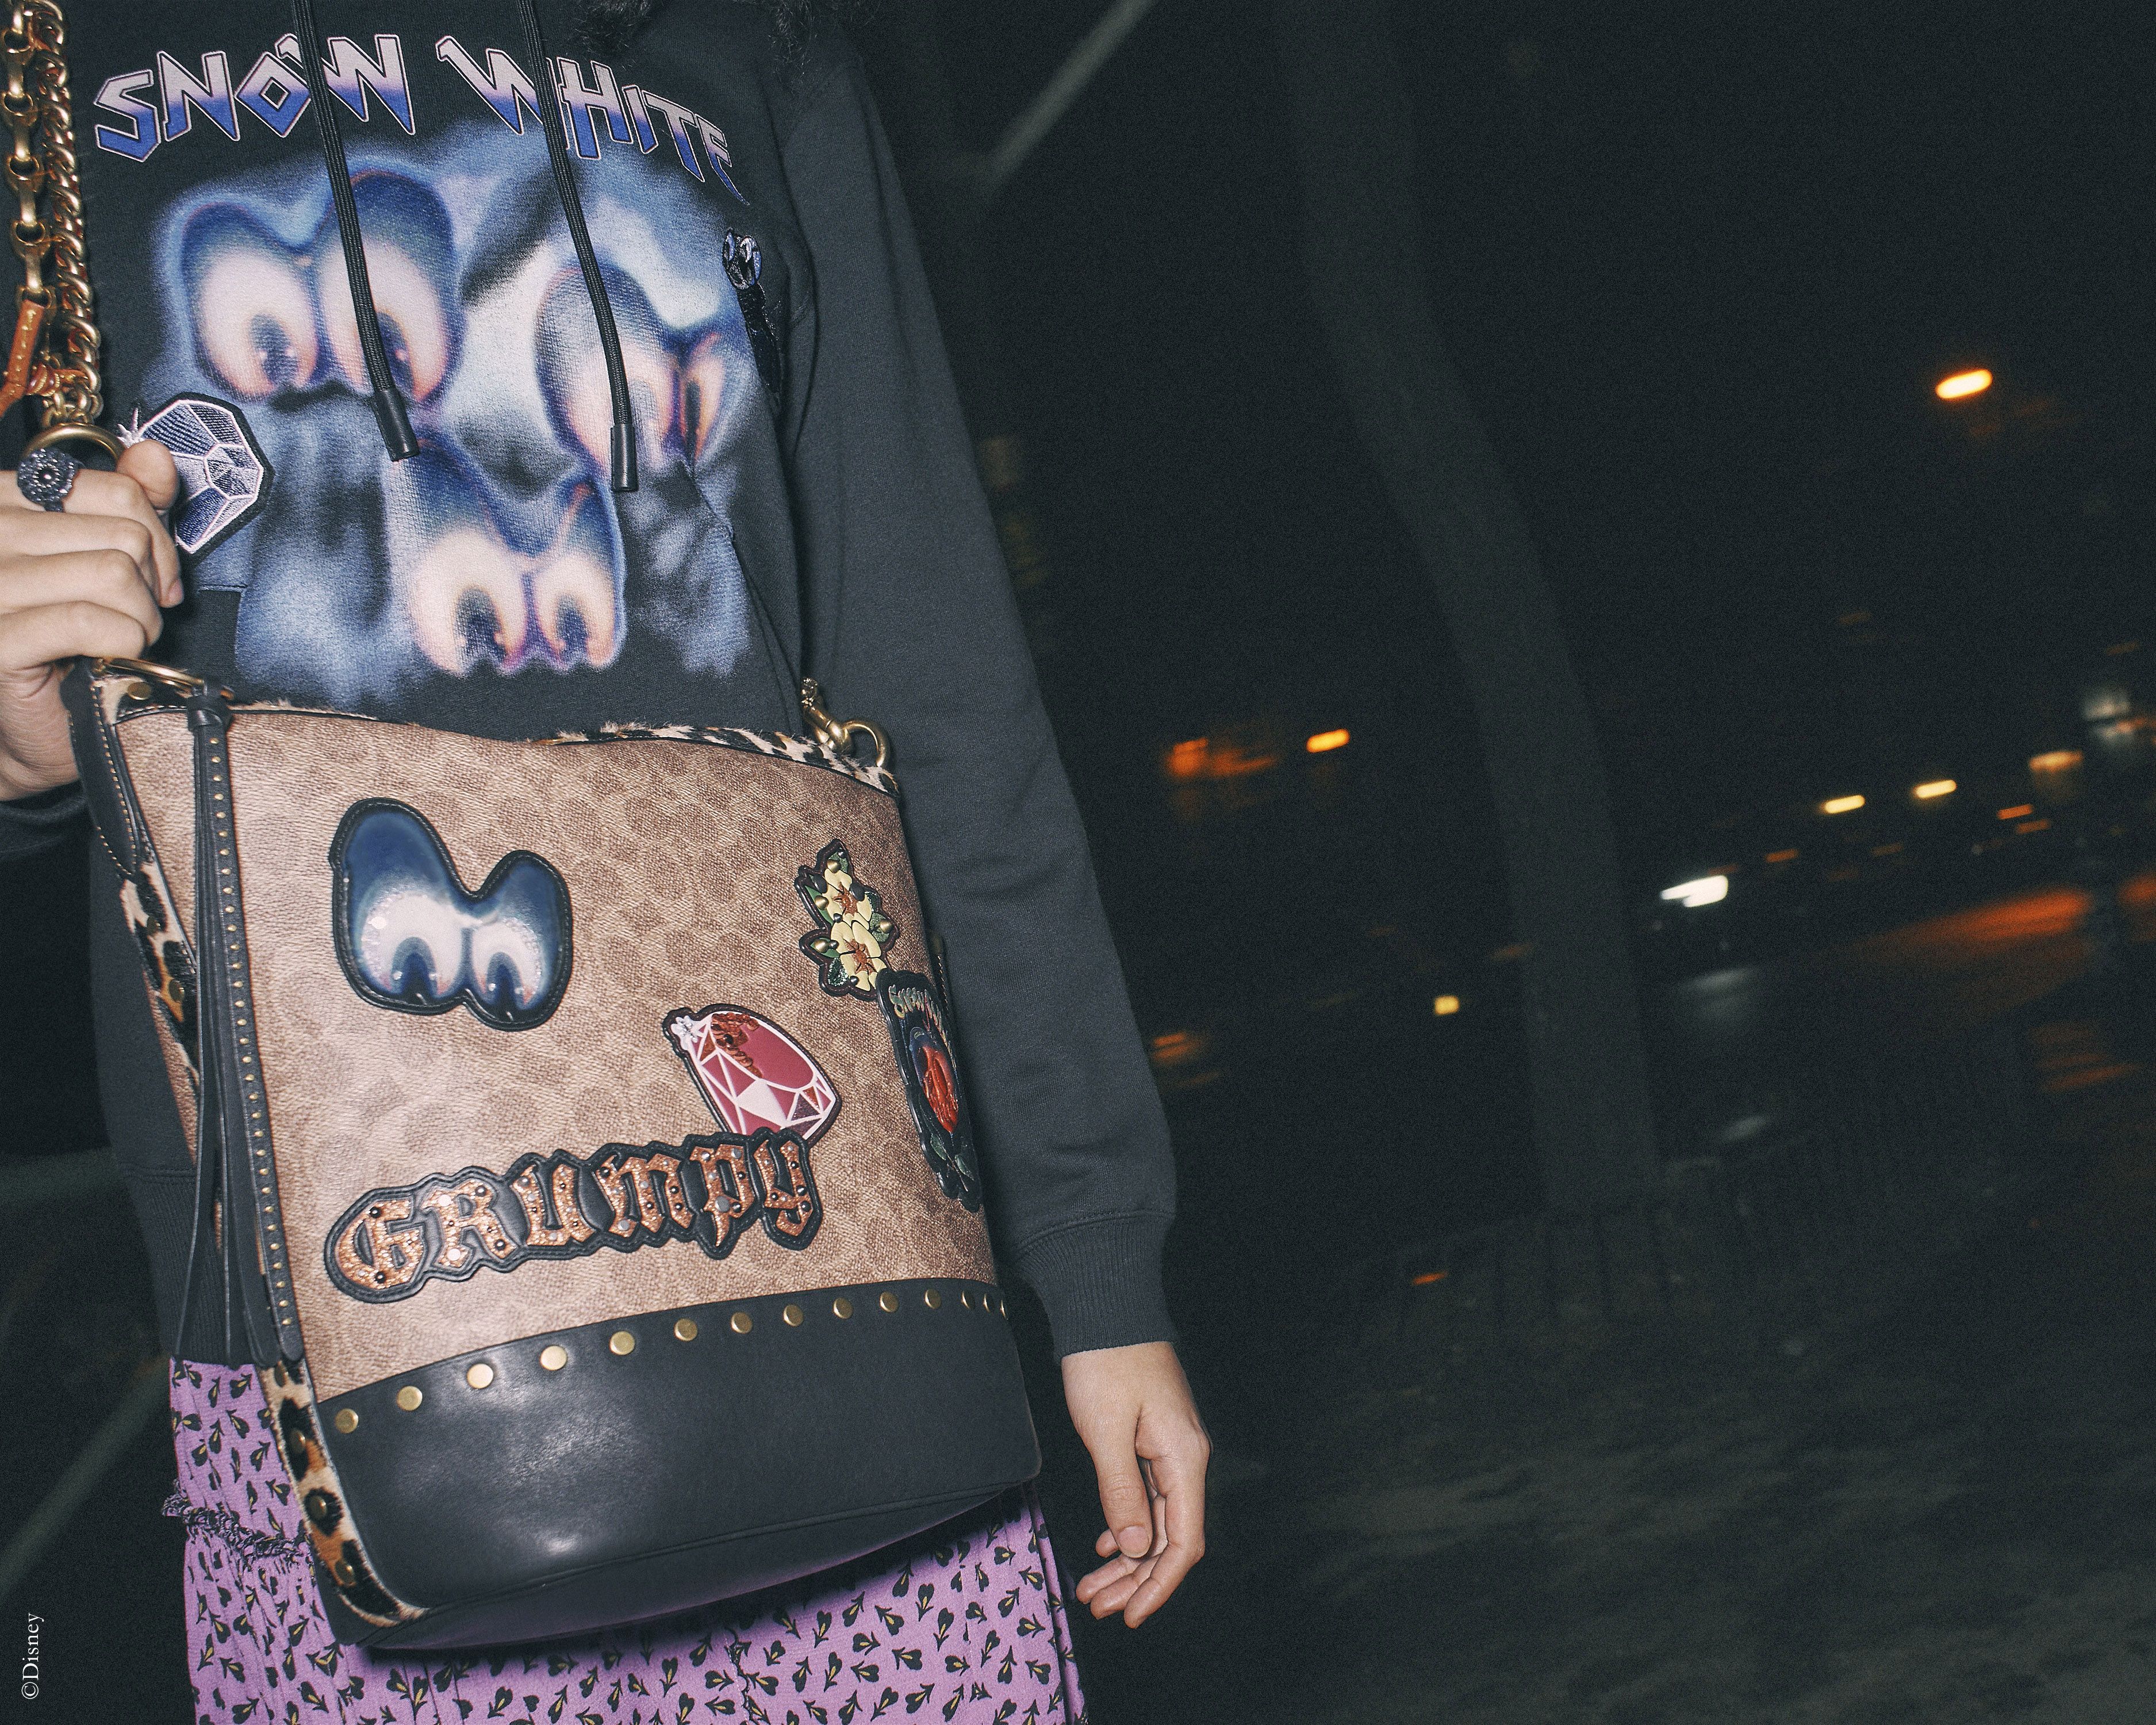 The Disney x Coach Collection  Tap into your dark side with these